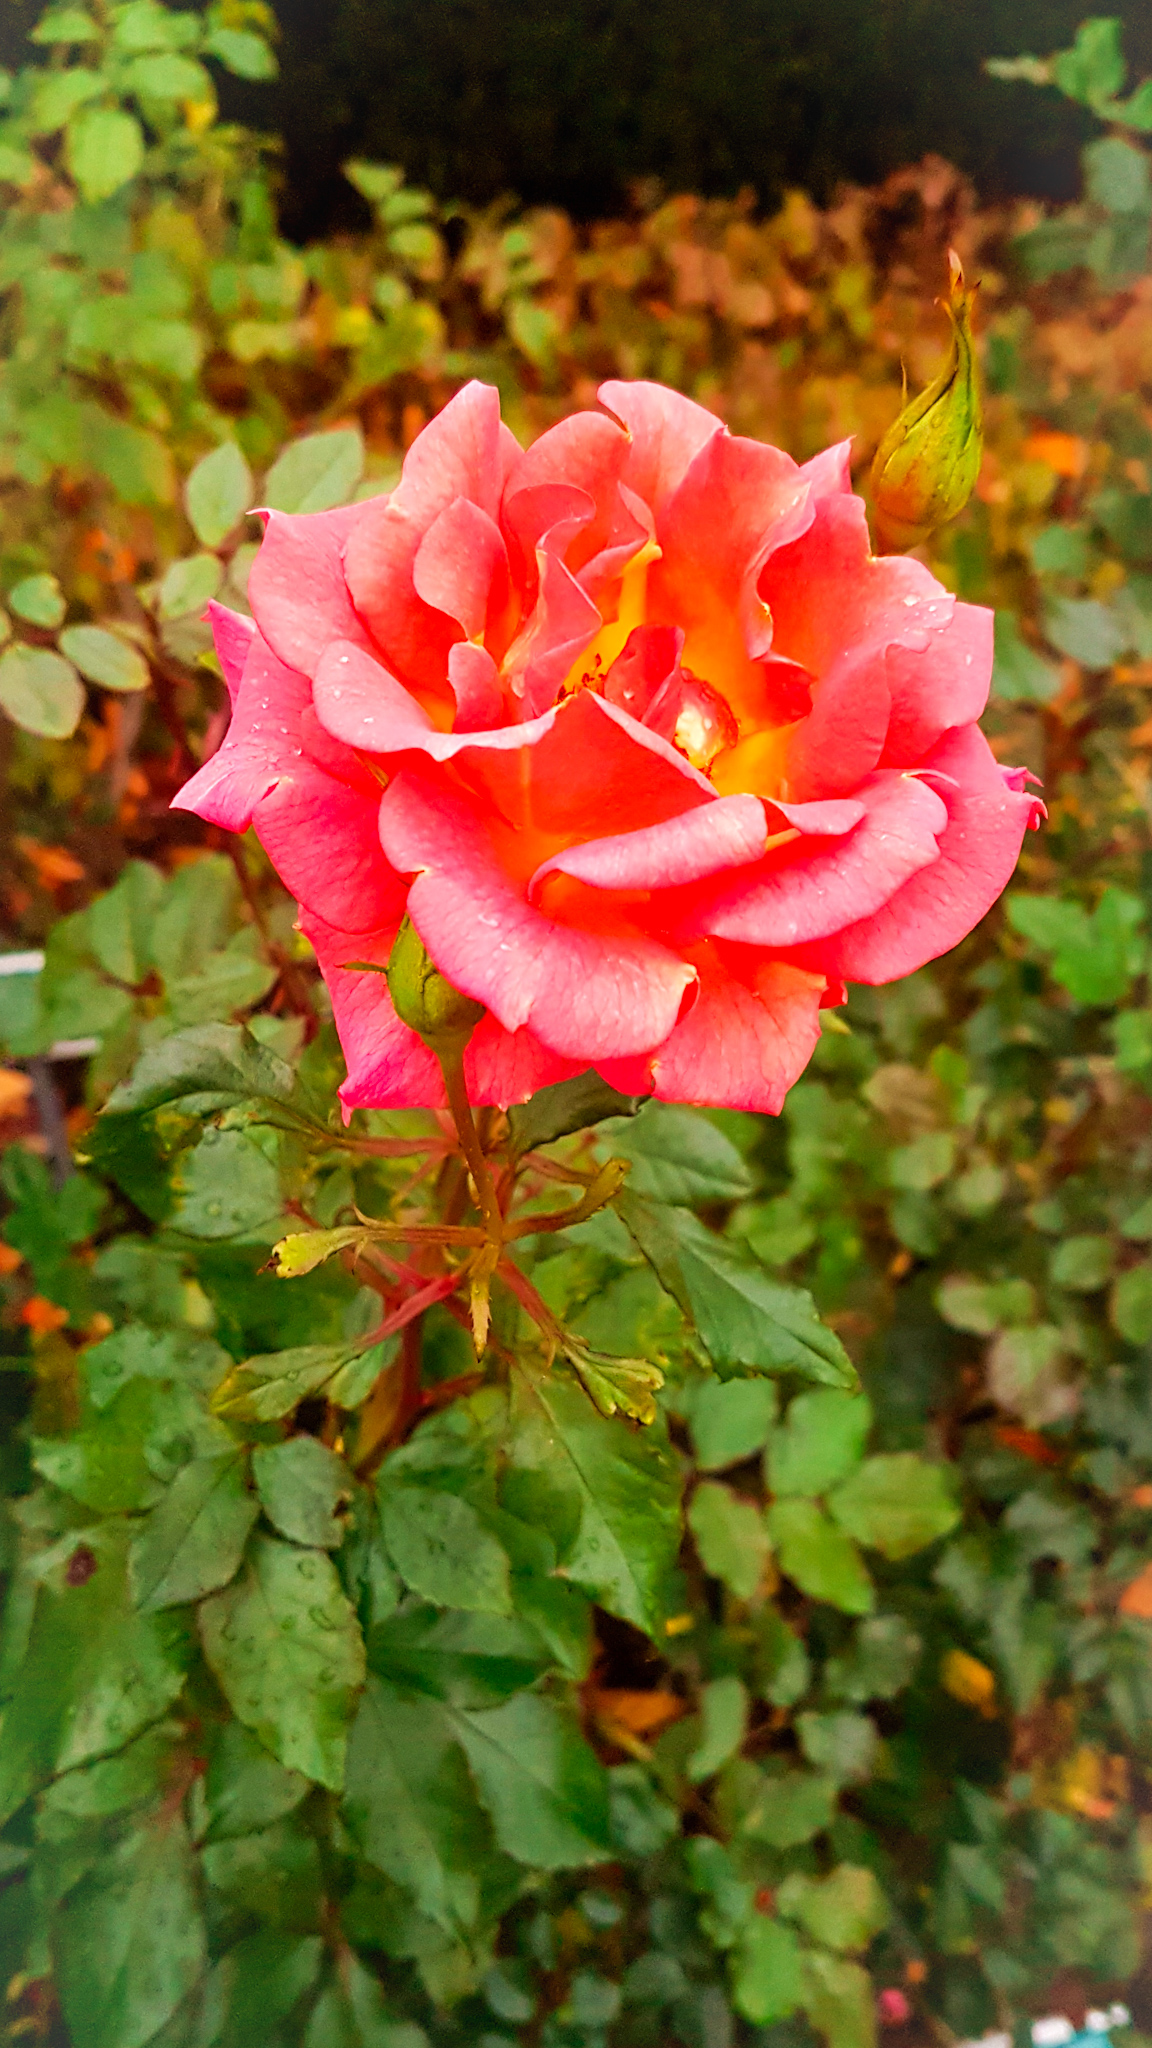 picture of an orange red rose